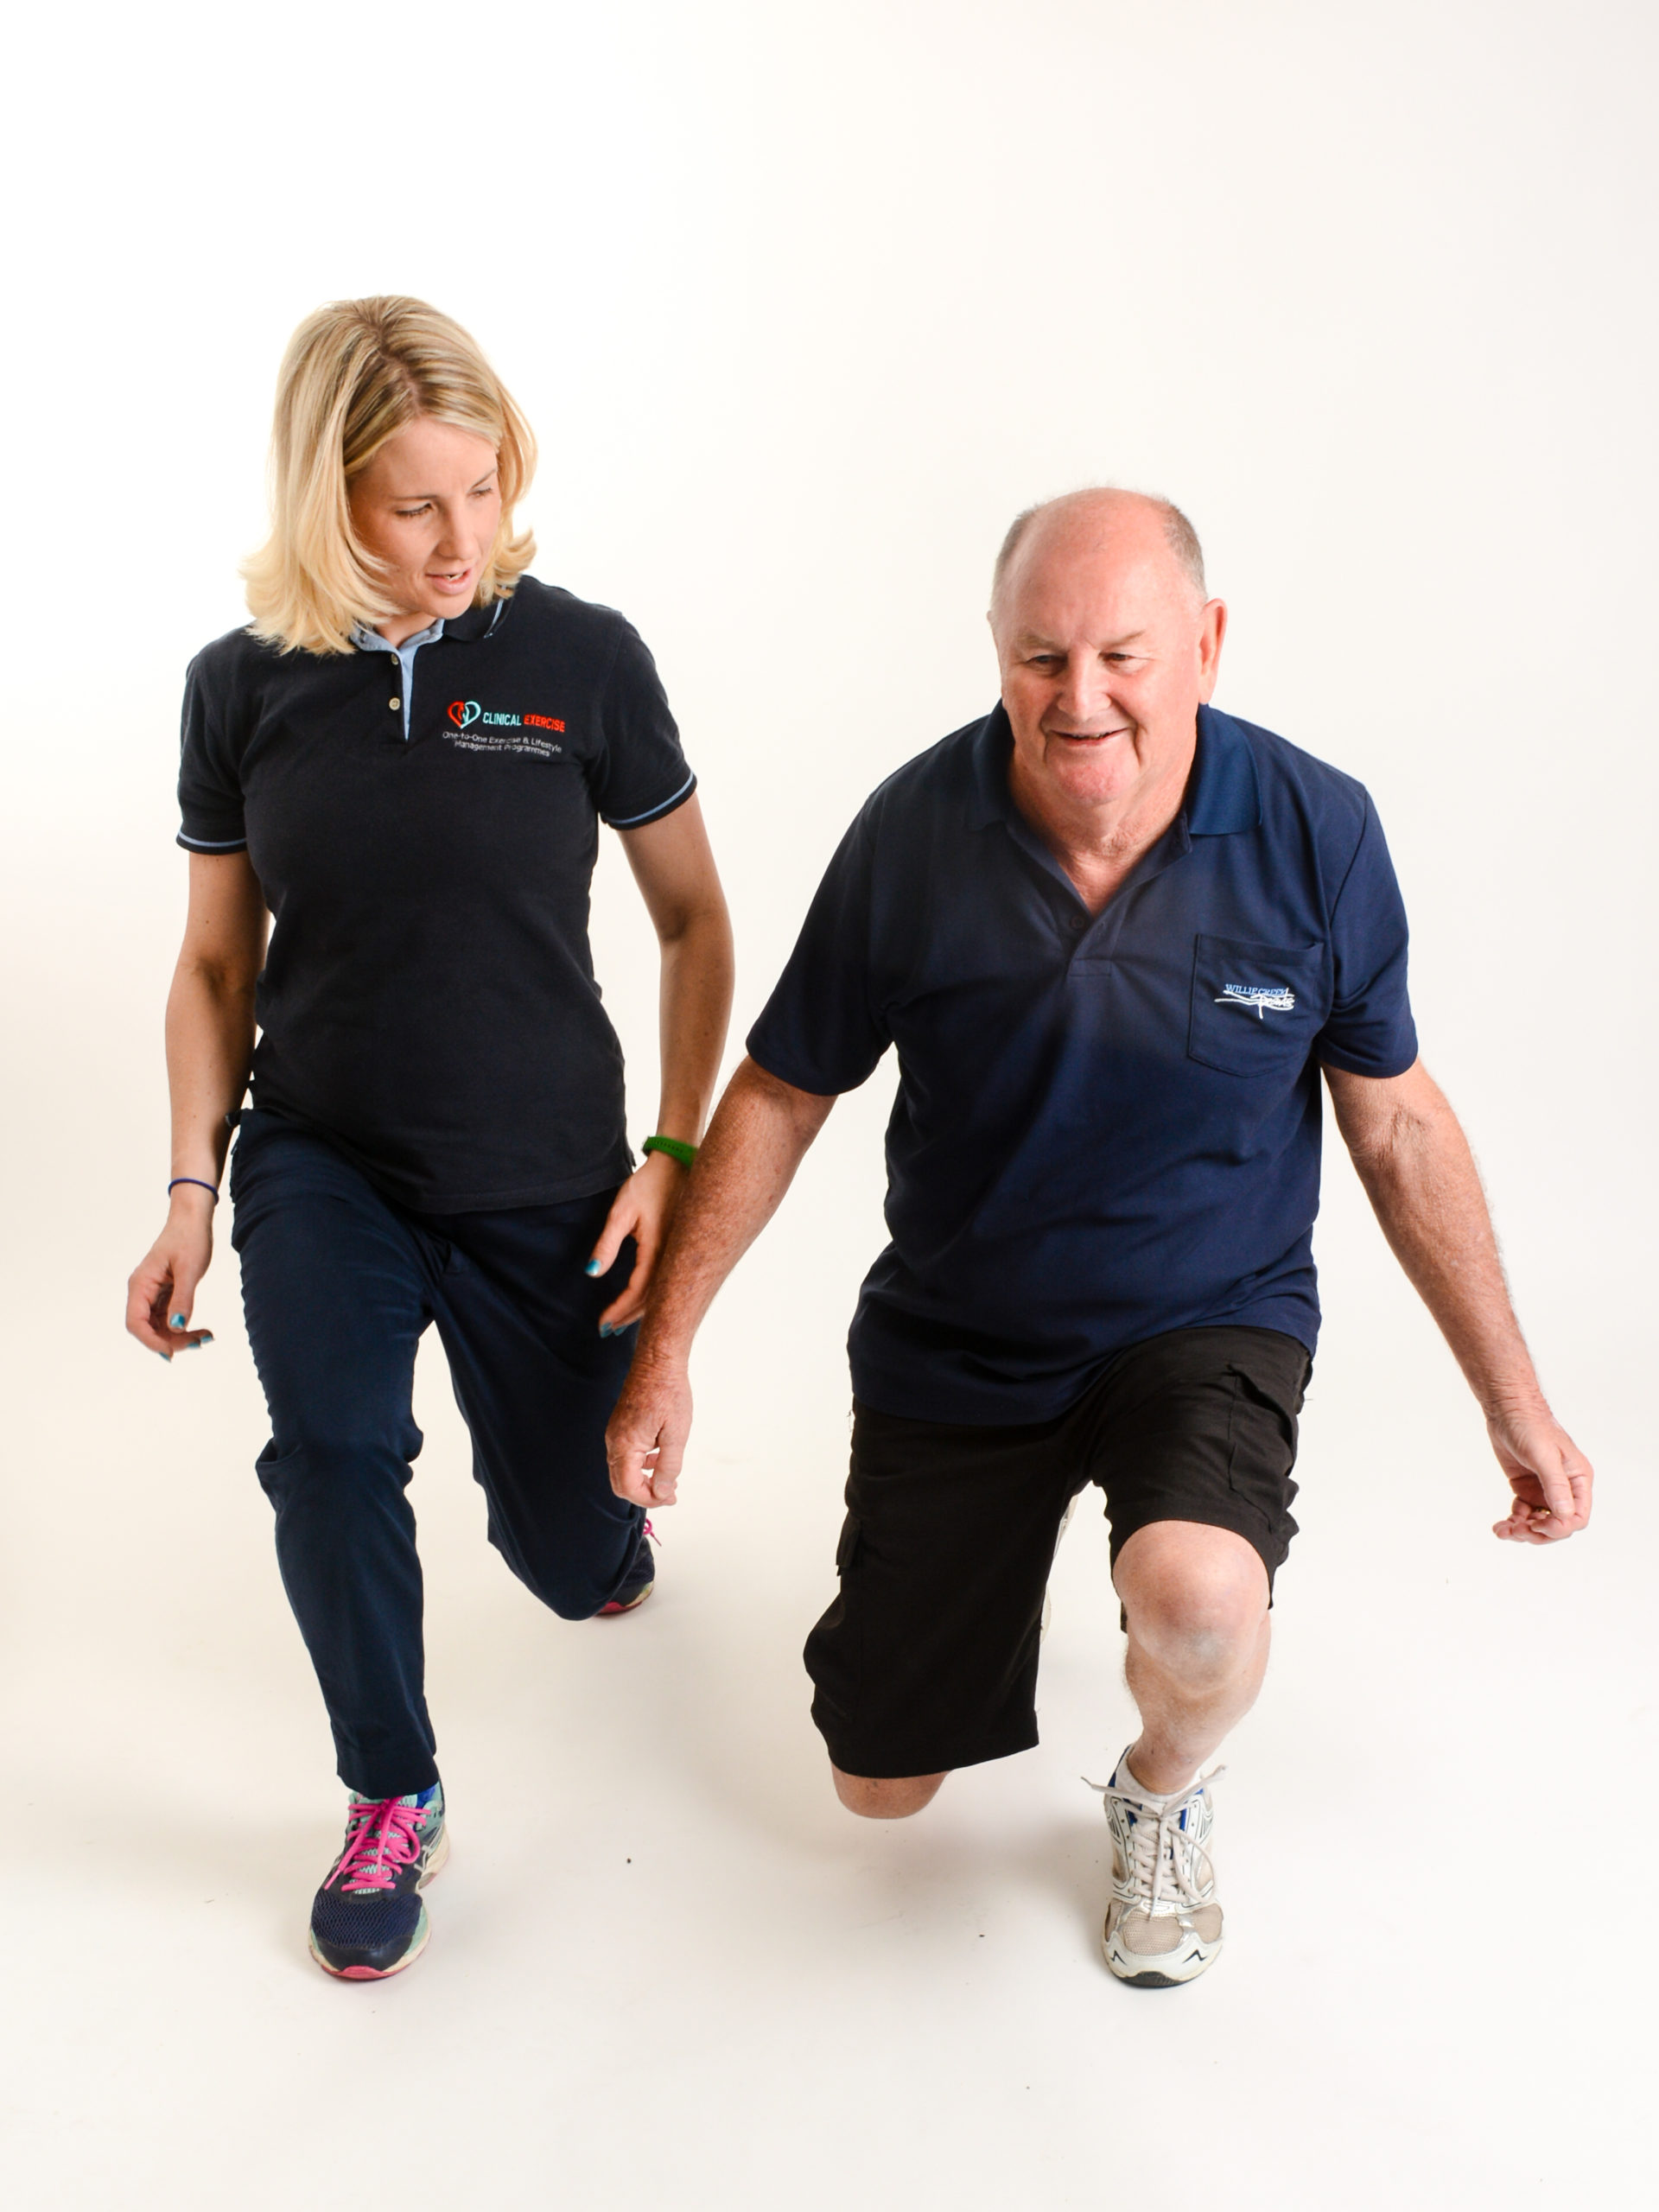 private cardiac rehab sessions in East Molesey